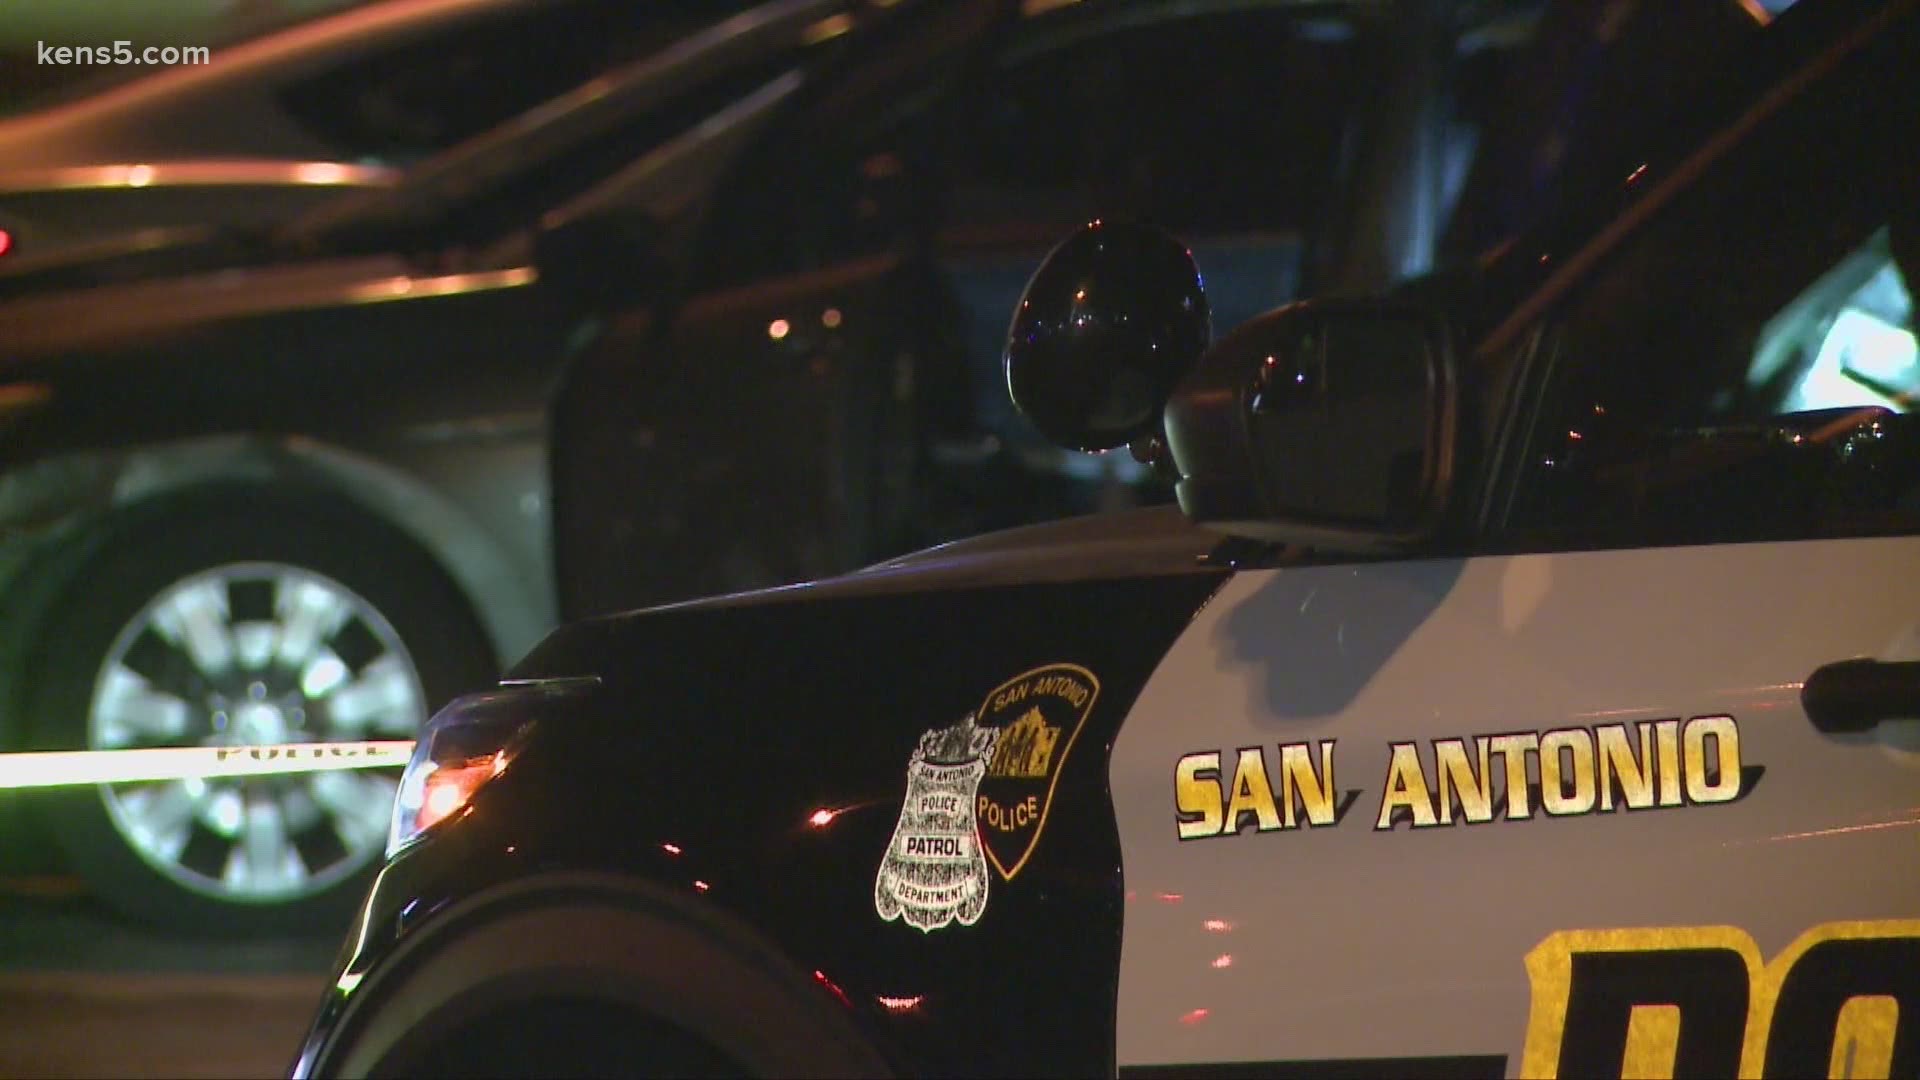 The victim, a man in his 20s, was shot in the back and taken to a local hospital with serious injuries, San Antonio police said.